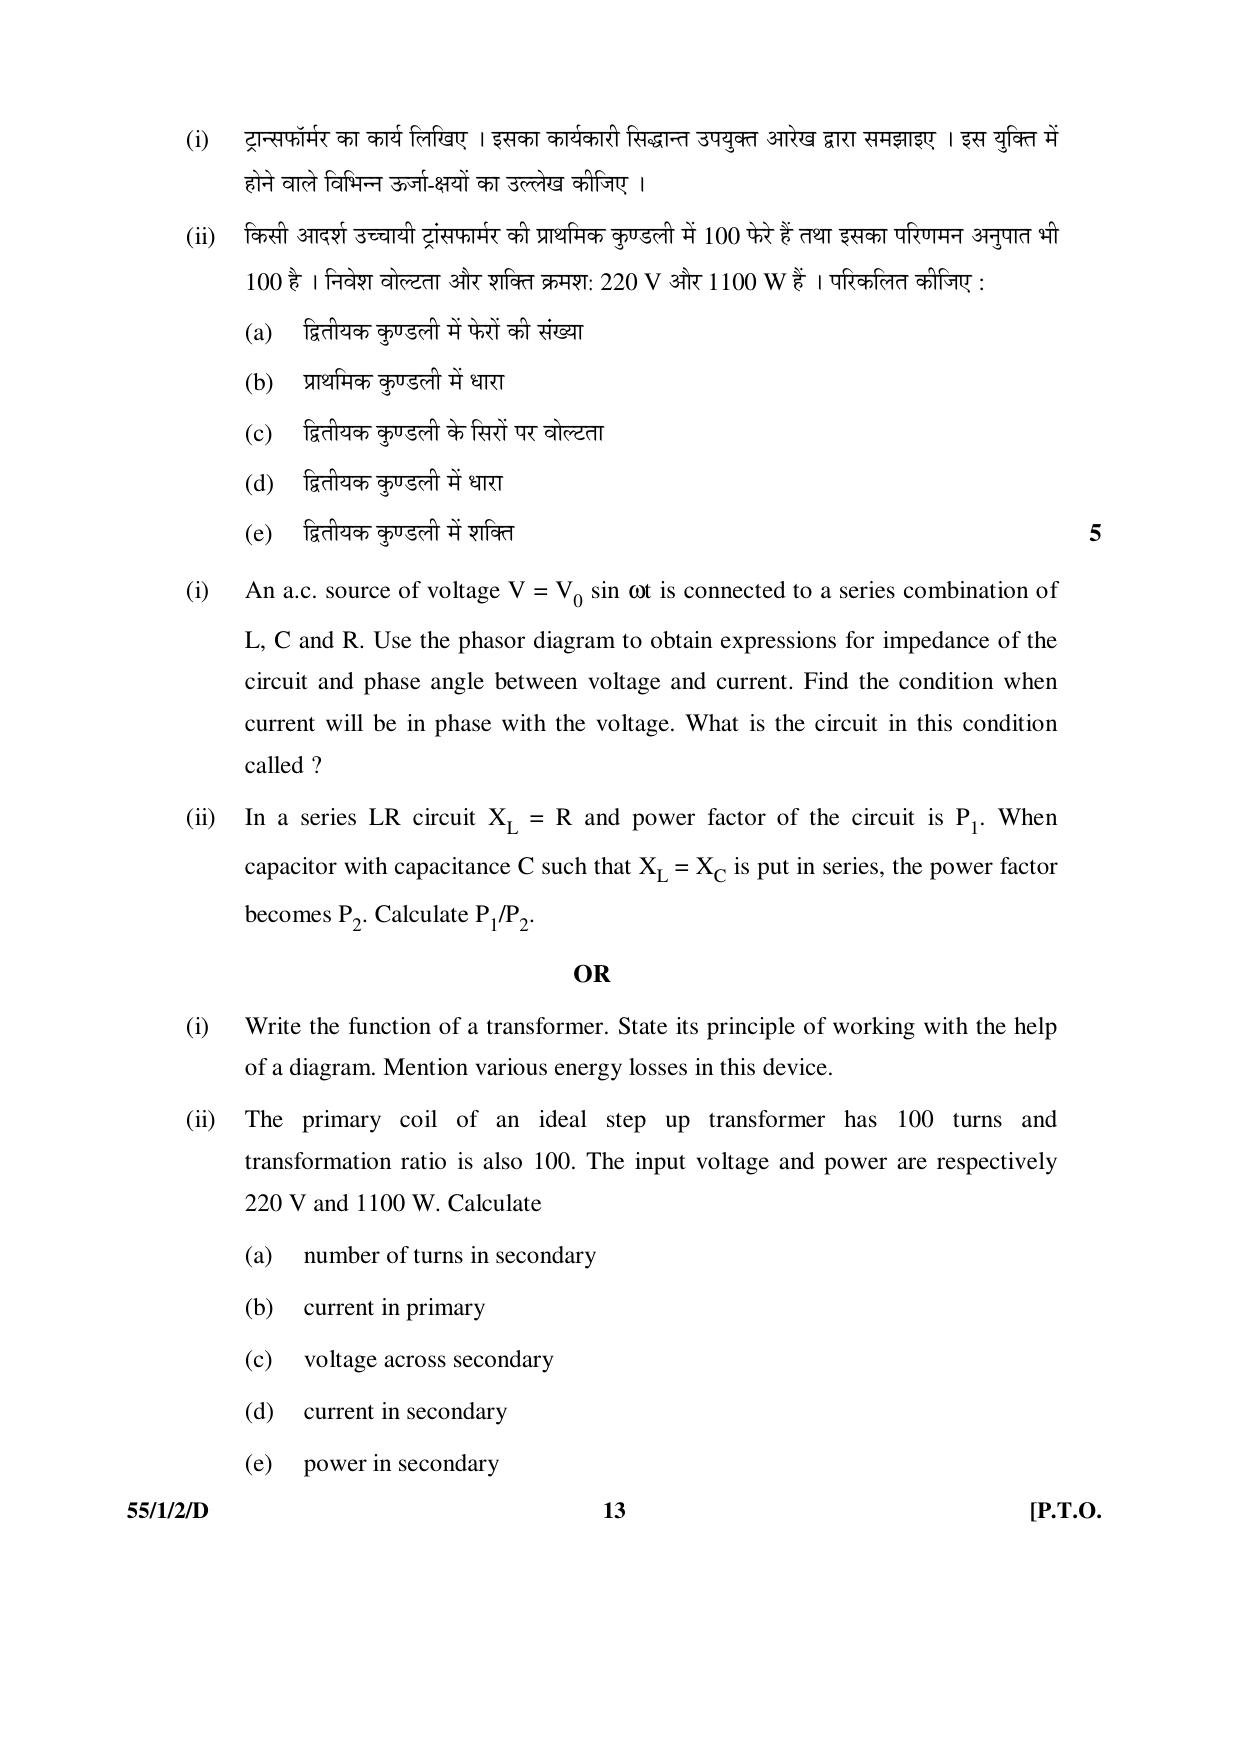 CBSE Class 12 55-1-2-D PHYSICS 2016 Question Paper - Page 13